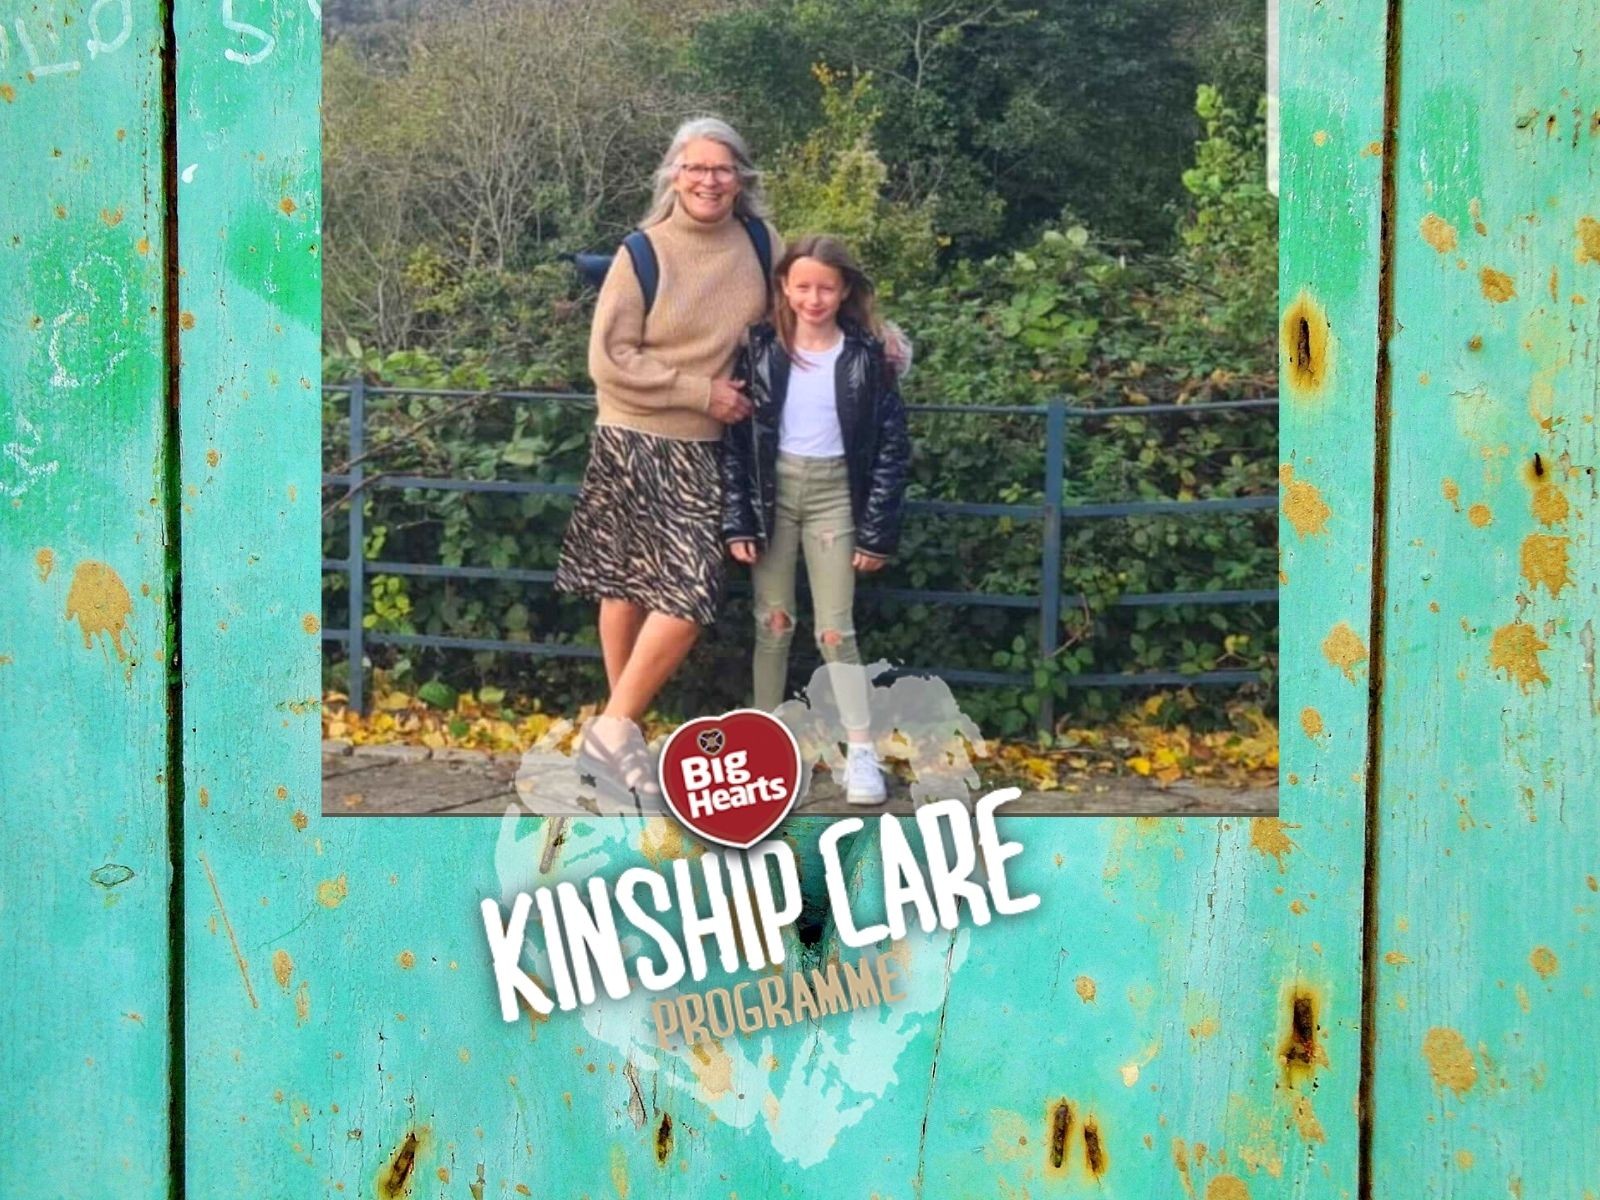  » Lesley’s Kinship Care story: “From day one, I felt very welcomed”